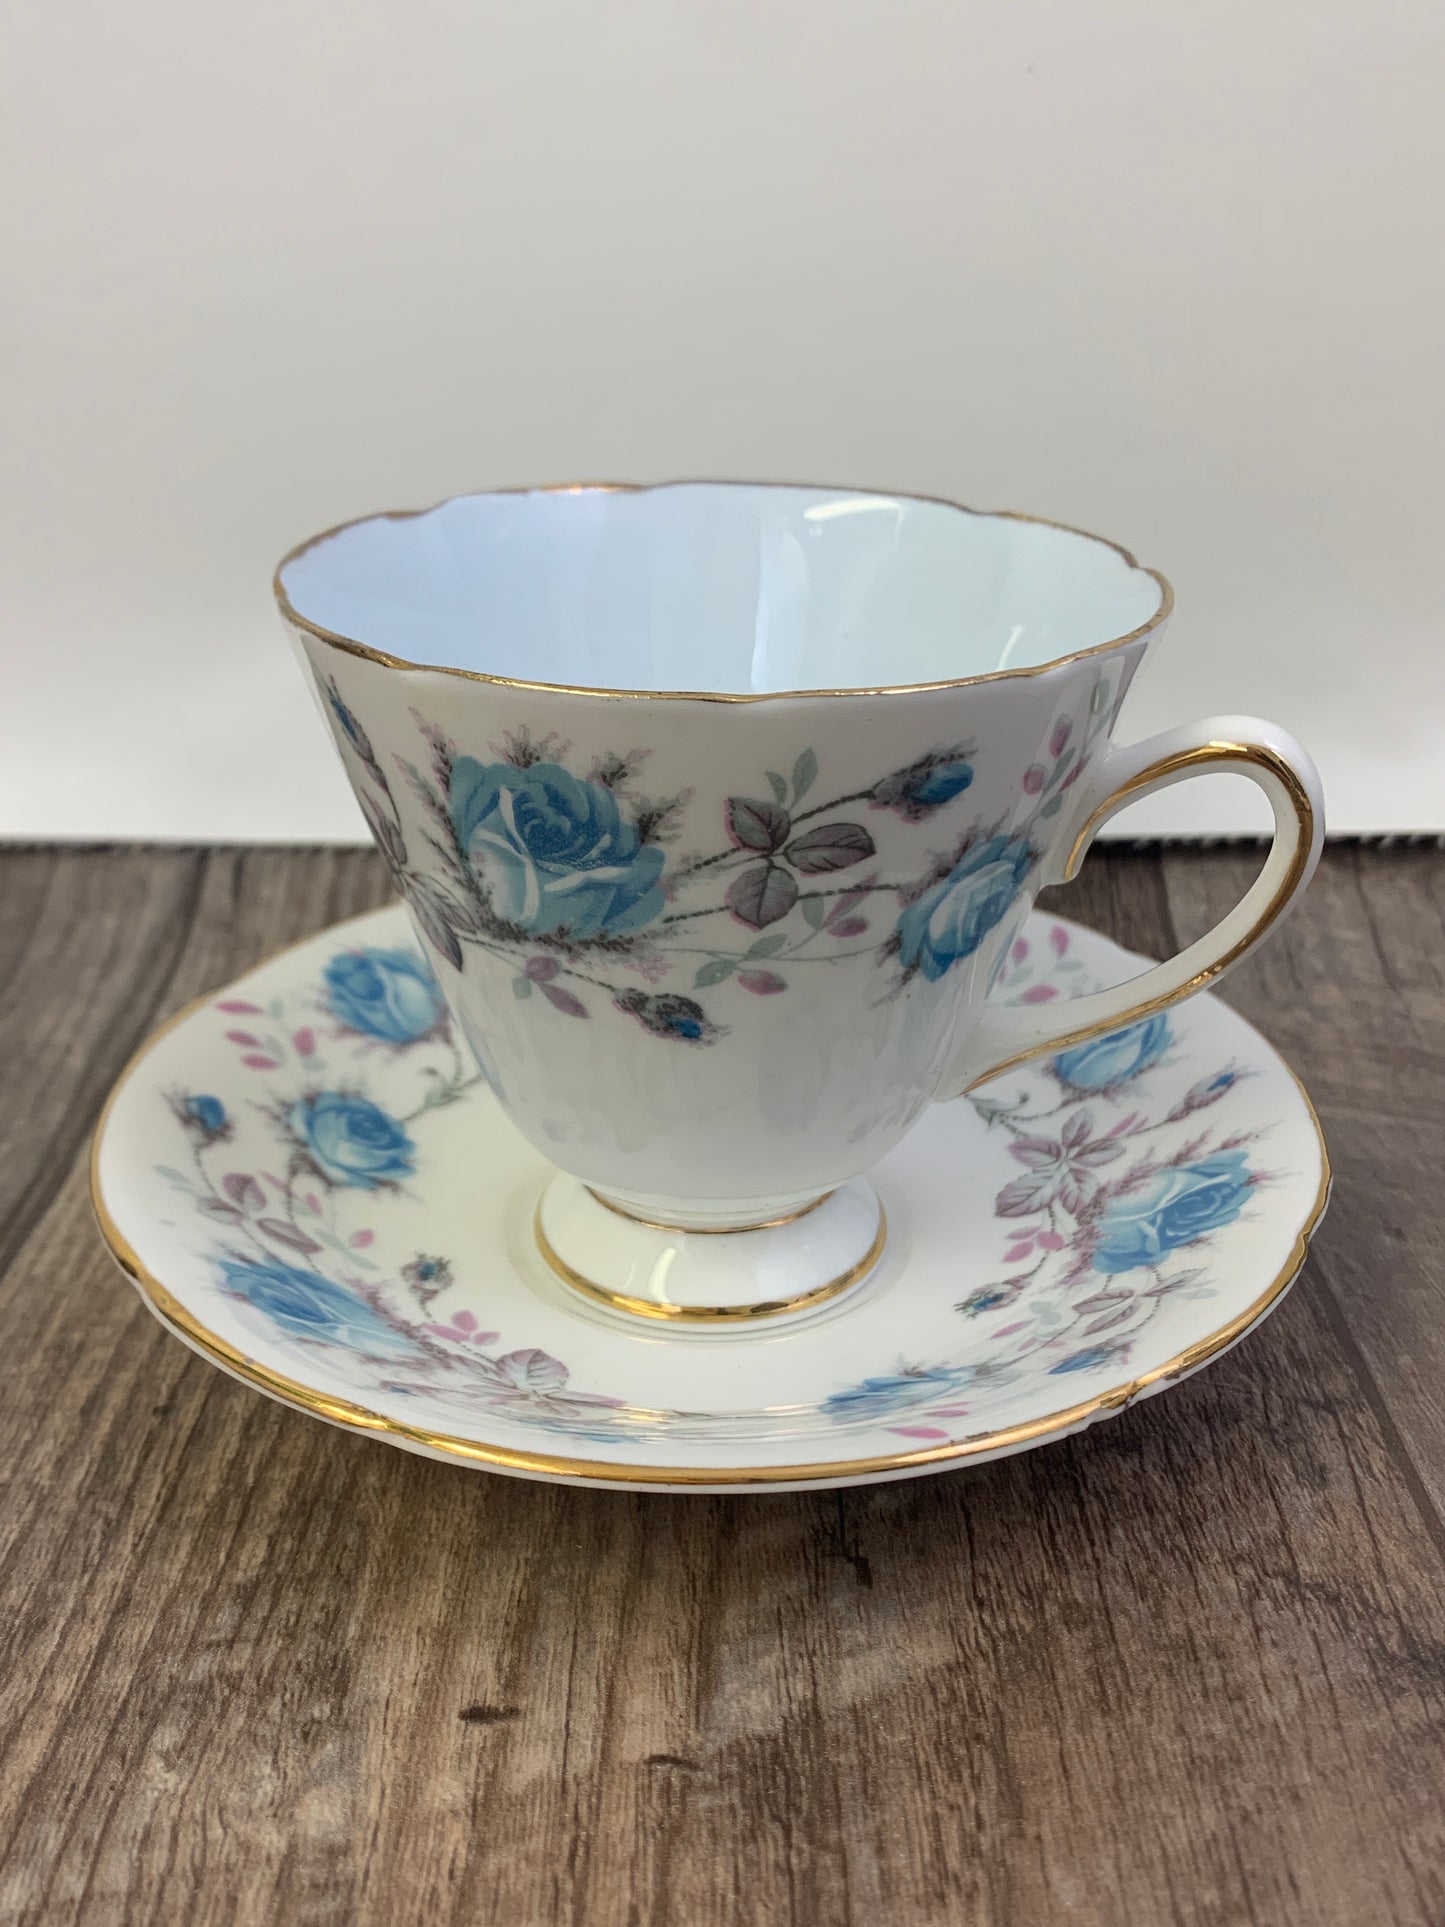 Vintage Teacup with Blue Floral Pattern Blue Inner Cup Mothers Day Gifts Vintage English Tea Cups